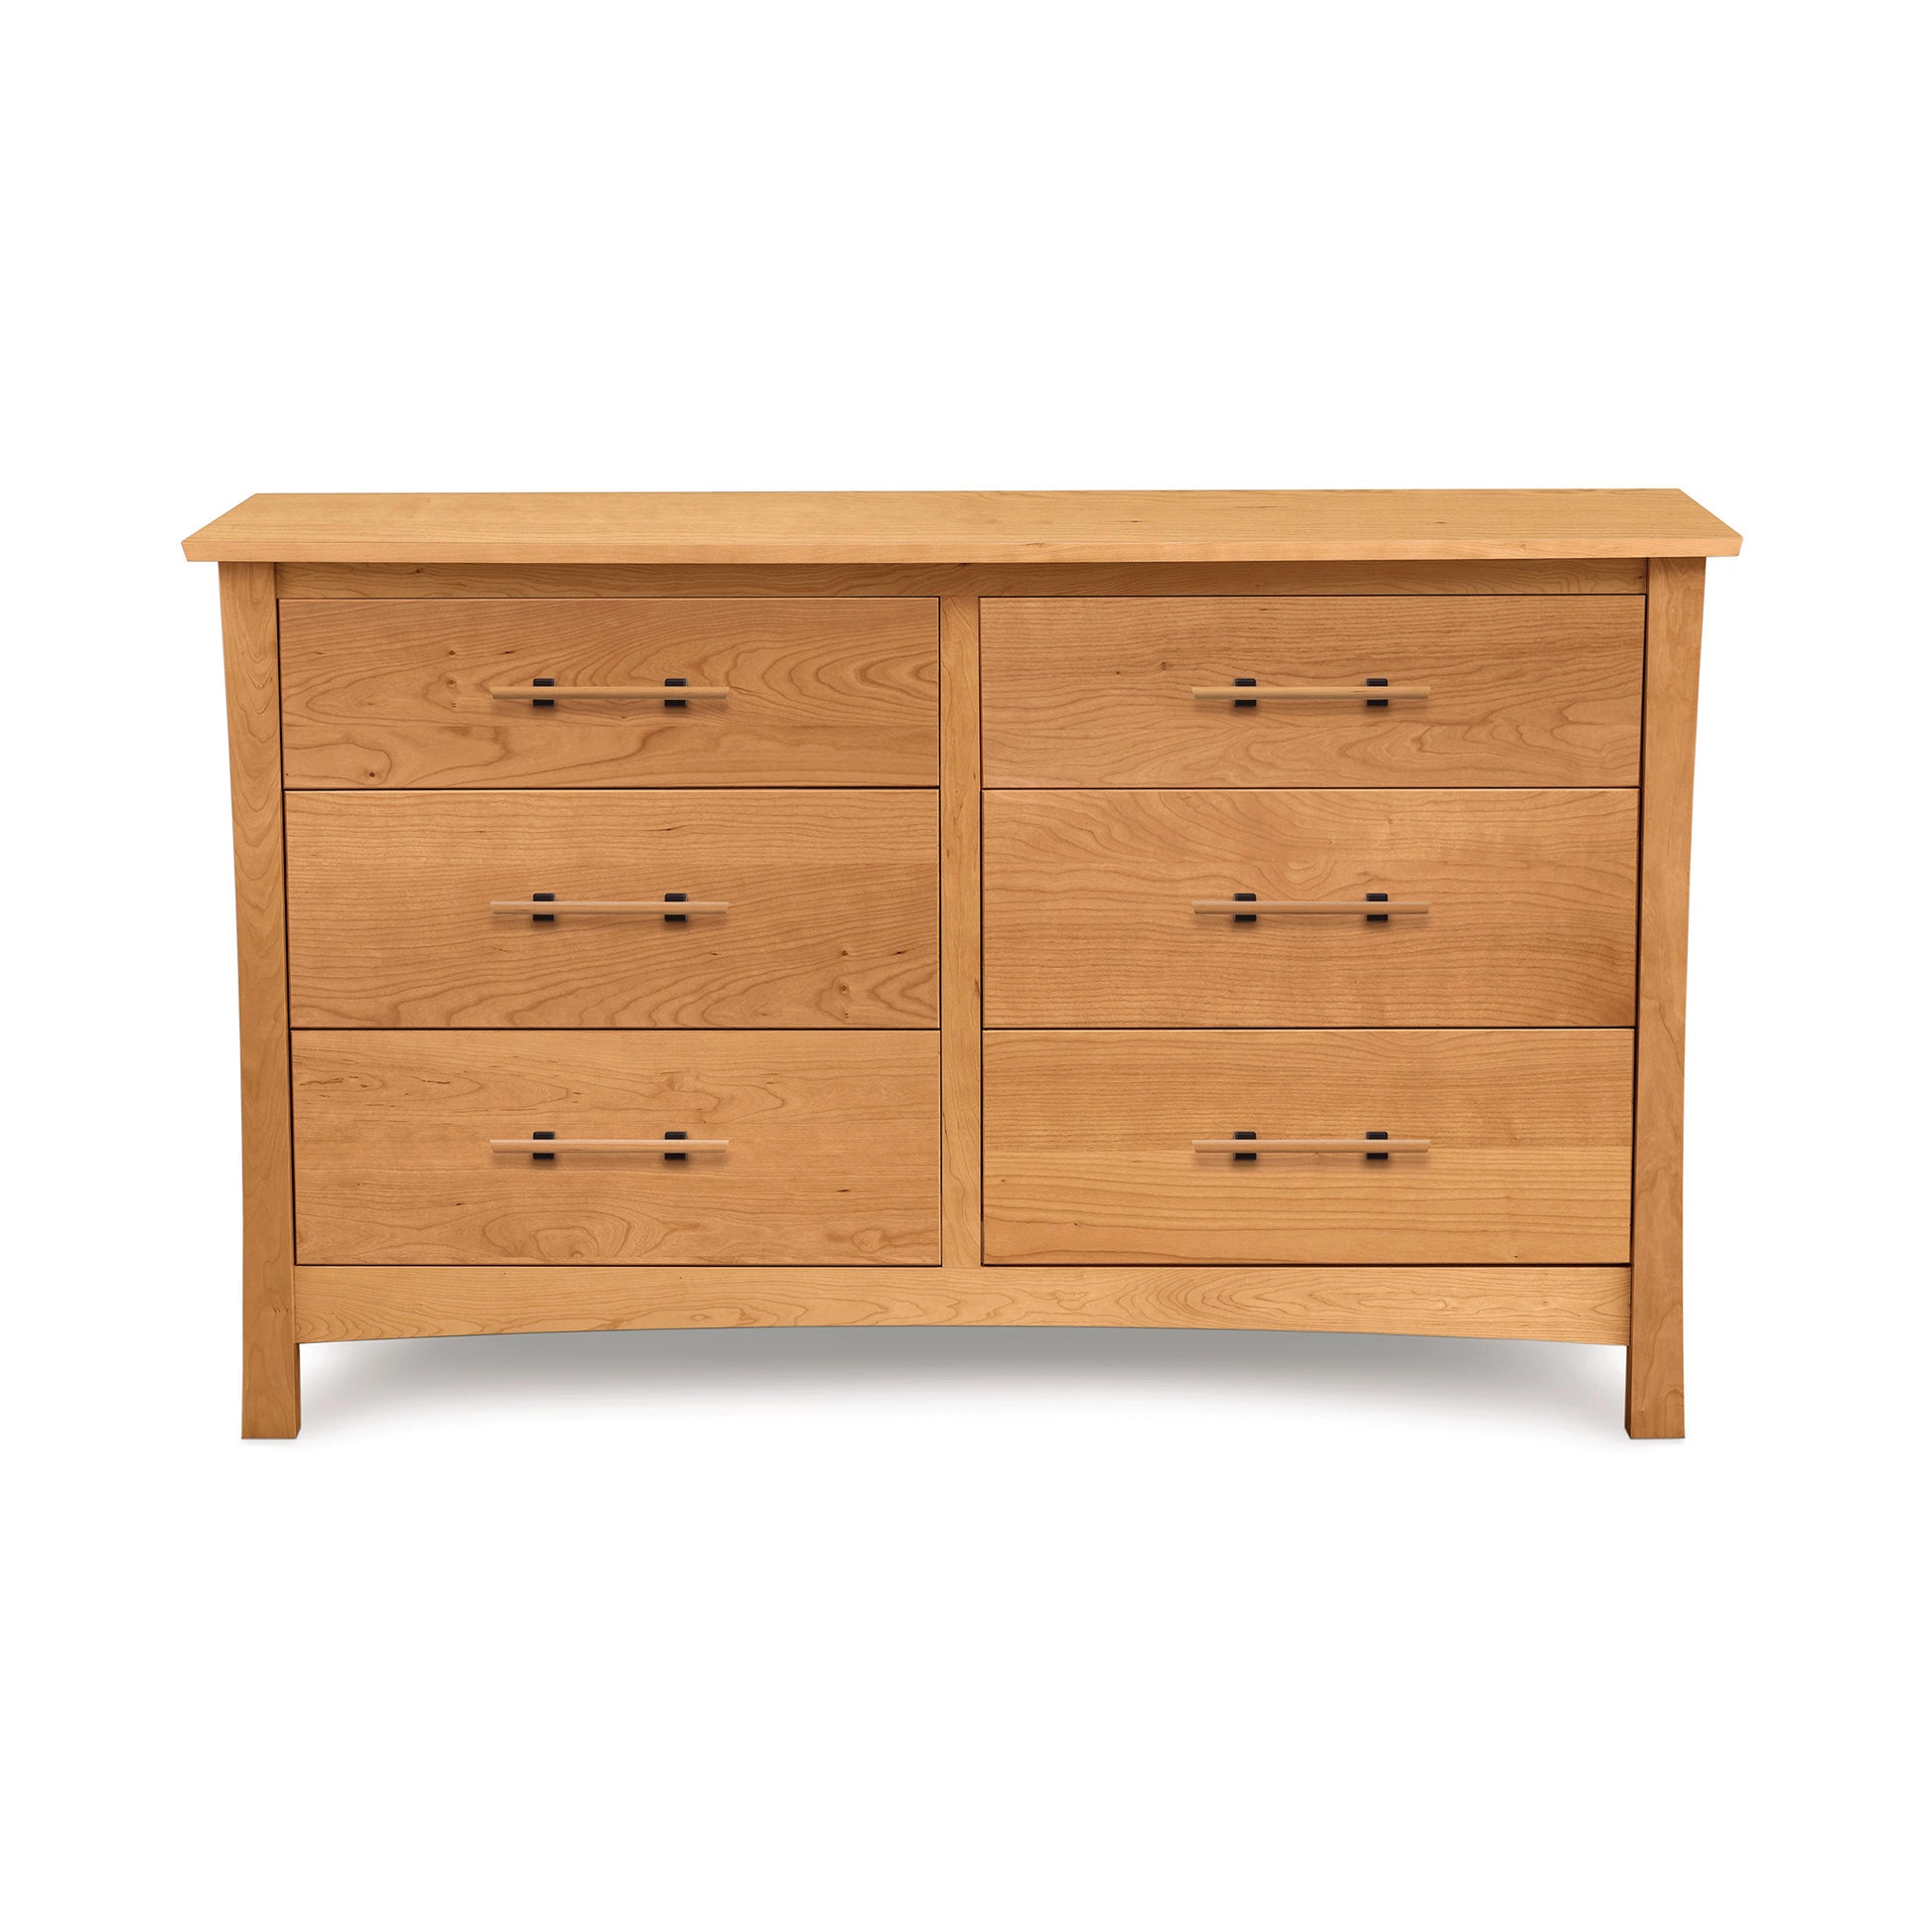 A handmade Monterey 6-Drawer Dresser by Copeland Furniture standing against a white background.